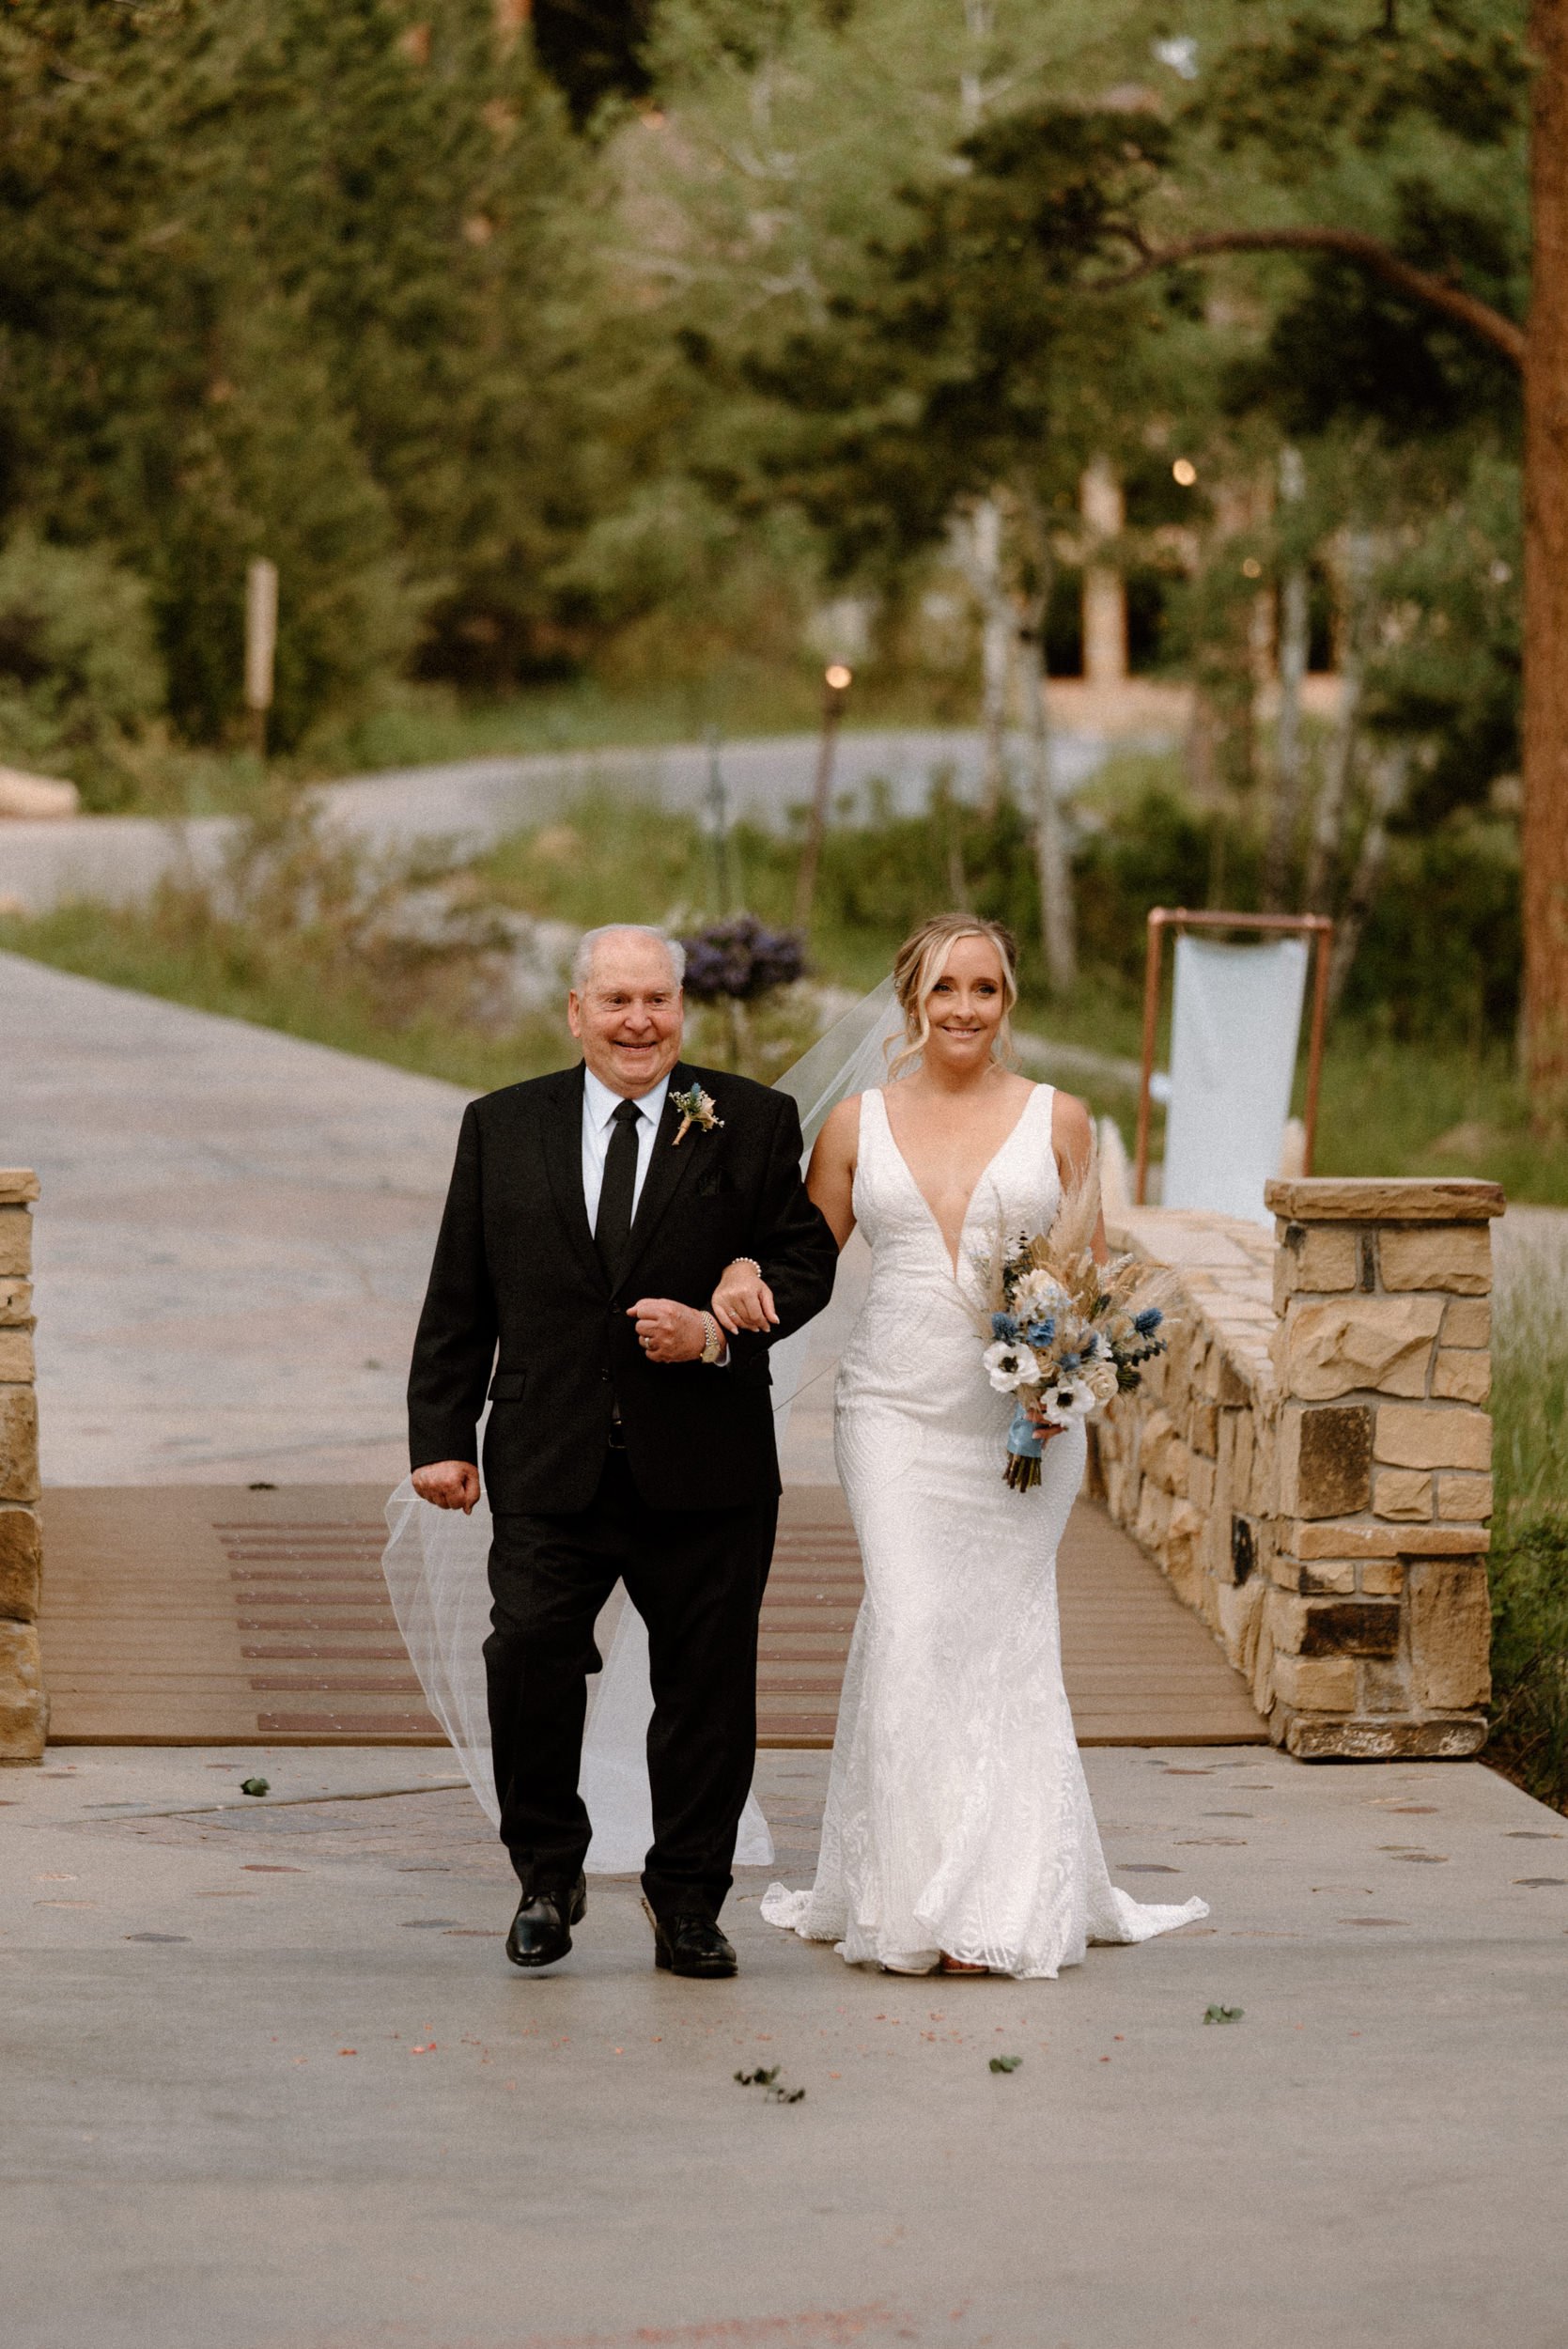 The bride and her father walk down the aisle together at Della Terra Mountain Chateau in Estes Park, CO